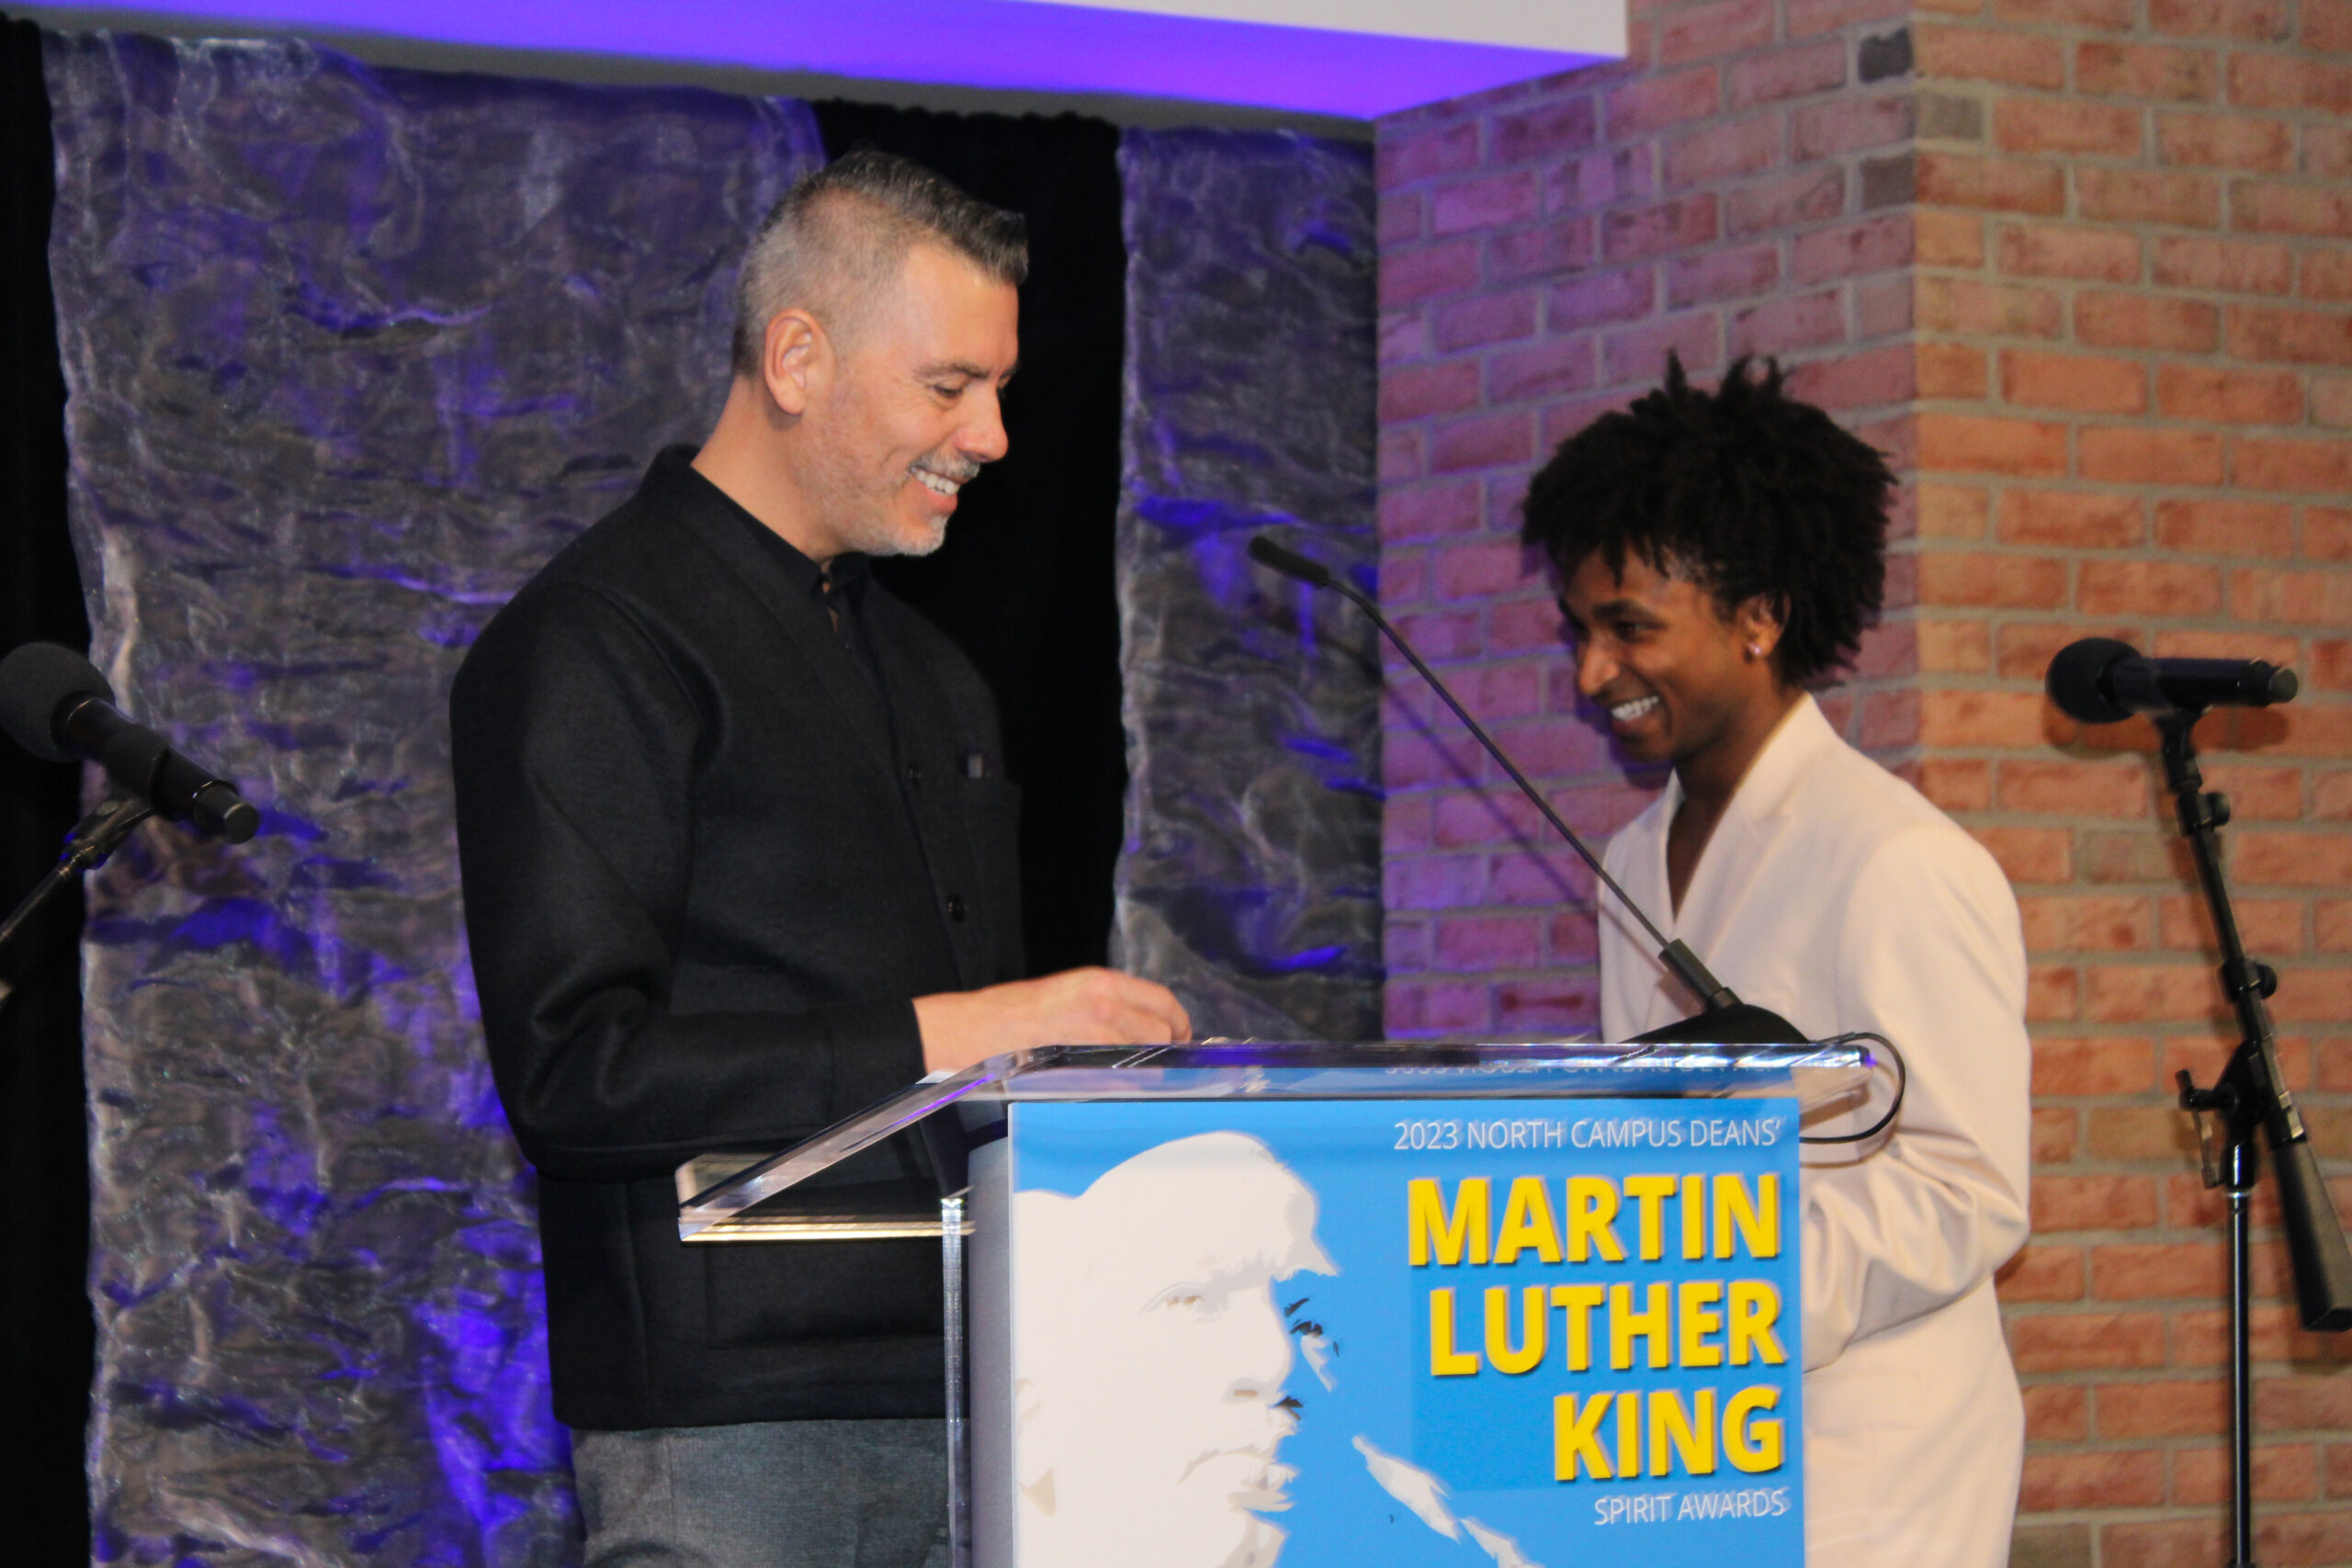 2023 NC Deans' MLK Spirit Awards — Student Recipient Timmy Thompson
& Jonathan Massey, Dean, A. Alfred Taubman College of Architecture and Urban Planning & Professor of Architecture, Taubman College of Architecture and Urban Planning